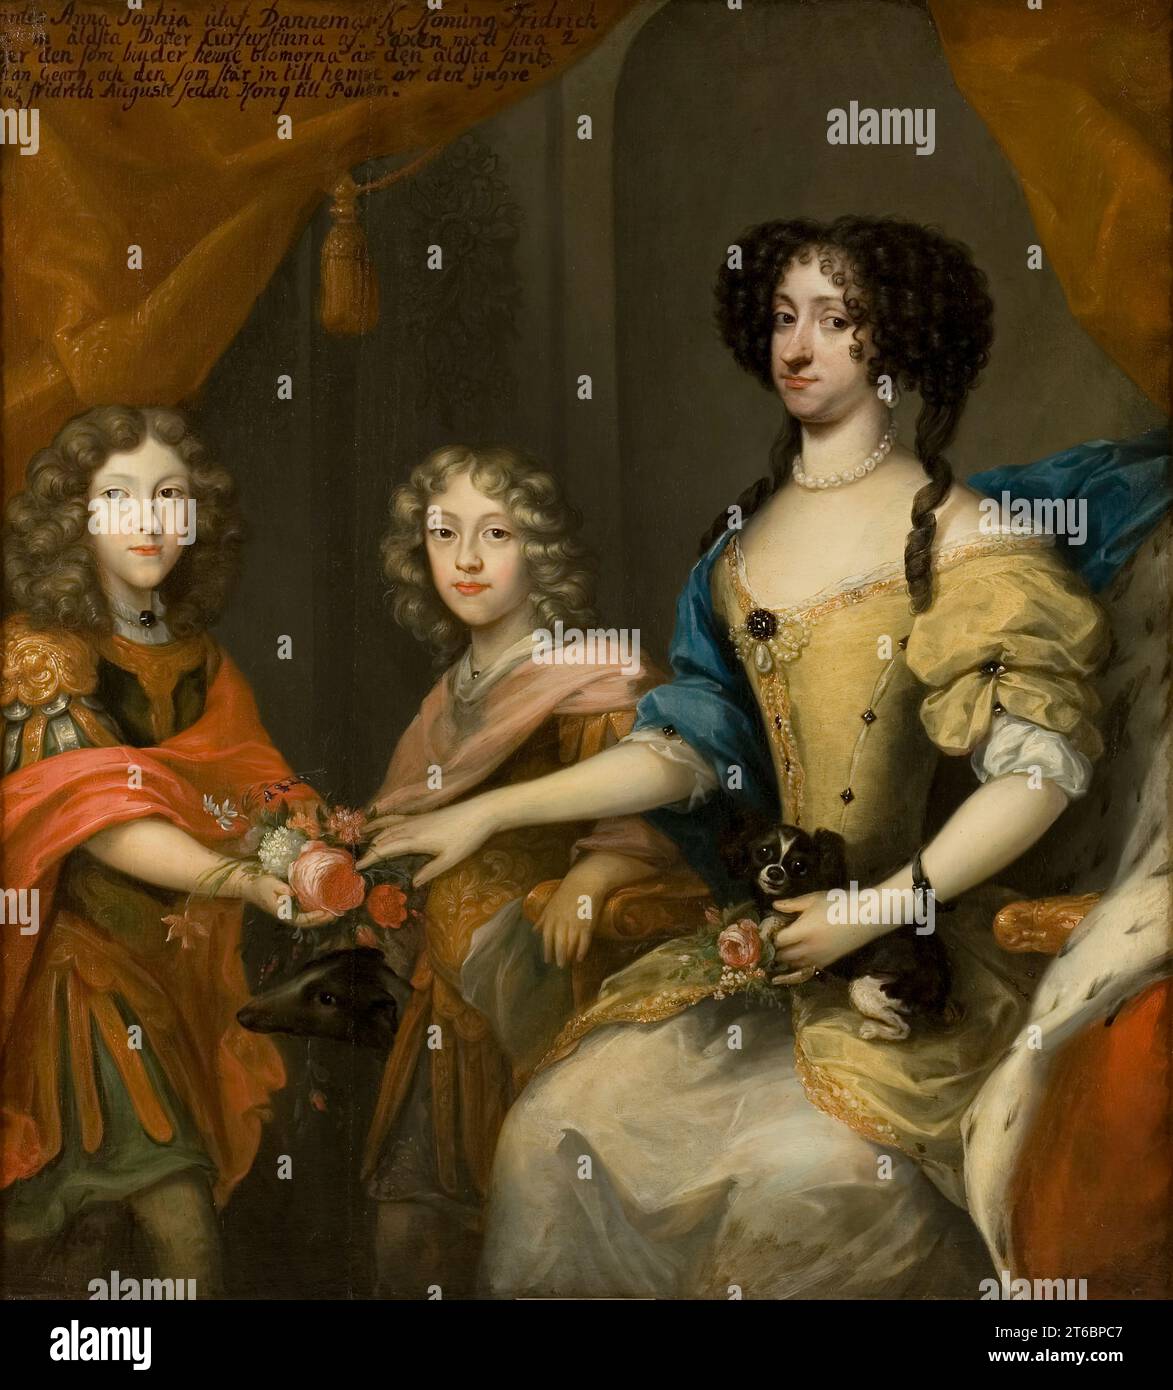 Anna Sofia of Denmark with her sons, late 17th-early 18th century. Anna Sofia (1647-1717), princess of Denmark, electress of Saxony, her sons Johann Georg IV, (1668-1697), elector of Saxony, and Friedrich August I / August II the strong, (1670-1733), elector of Saxony, king of Poland. Attributed to David von Krafft Stock Photo